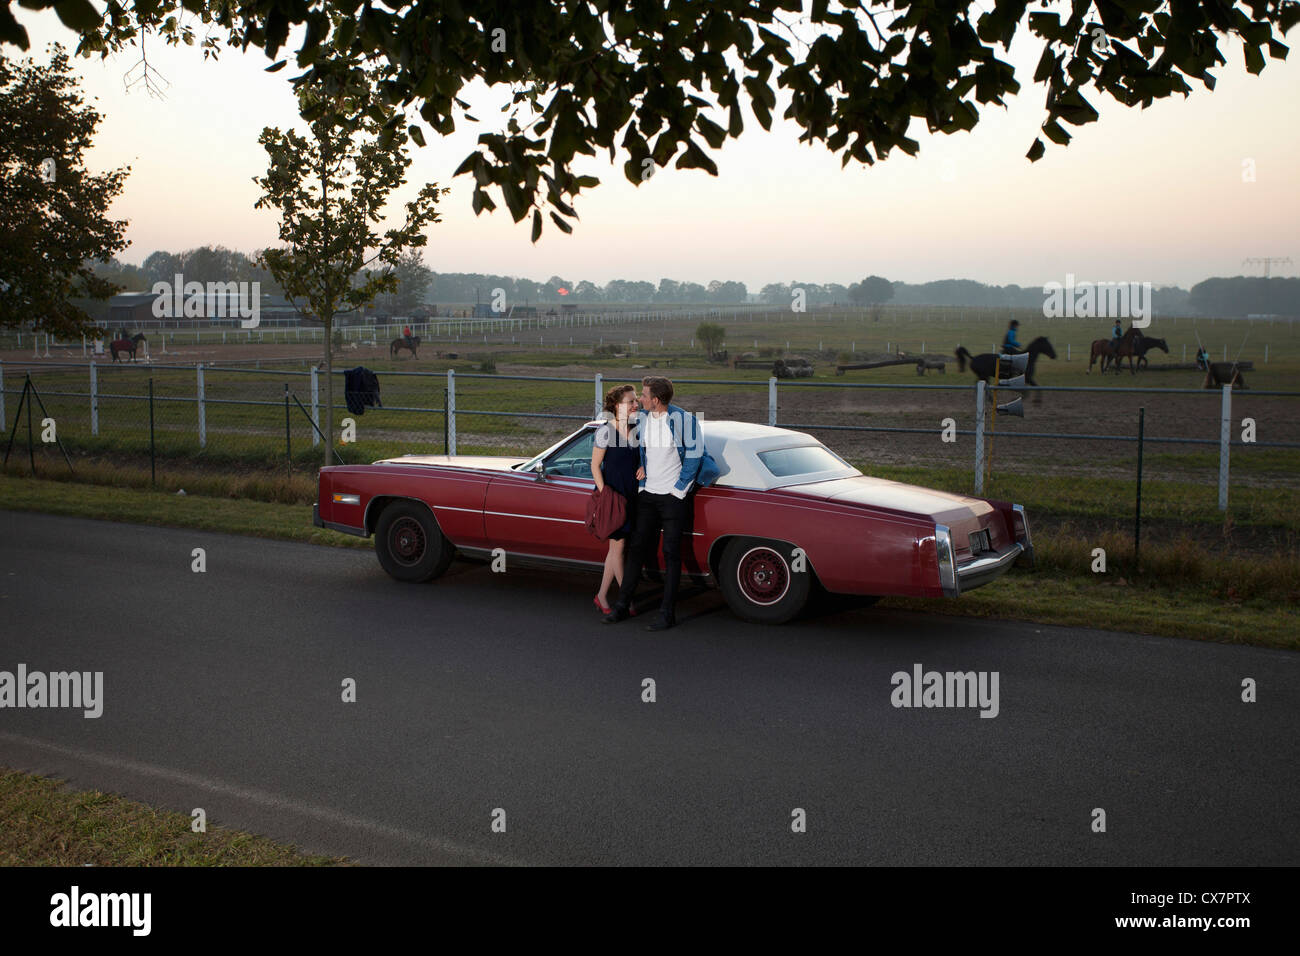 A rockabilly couple leaning against a vintage car in the country Stock Photo